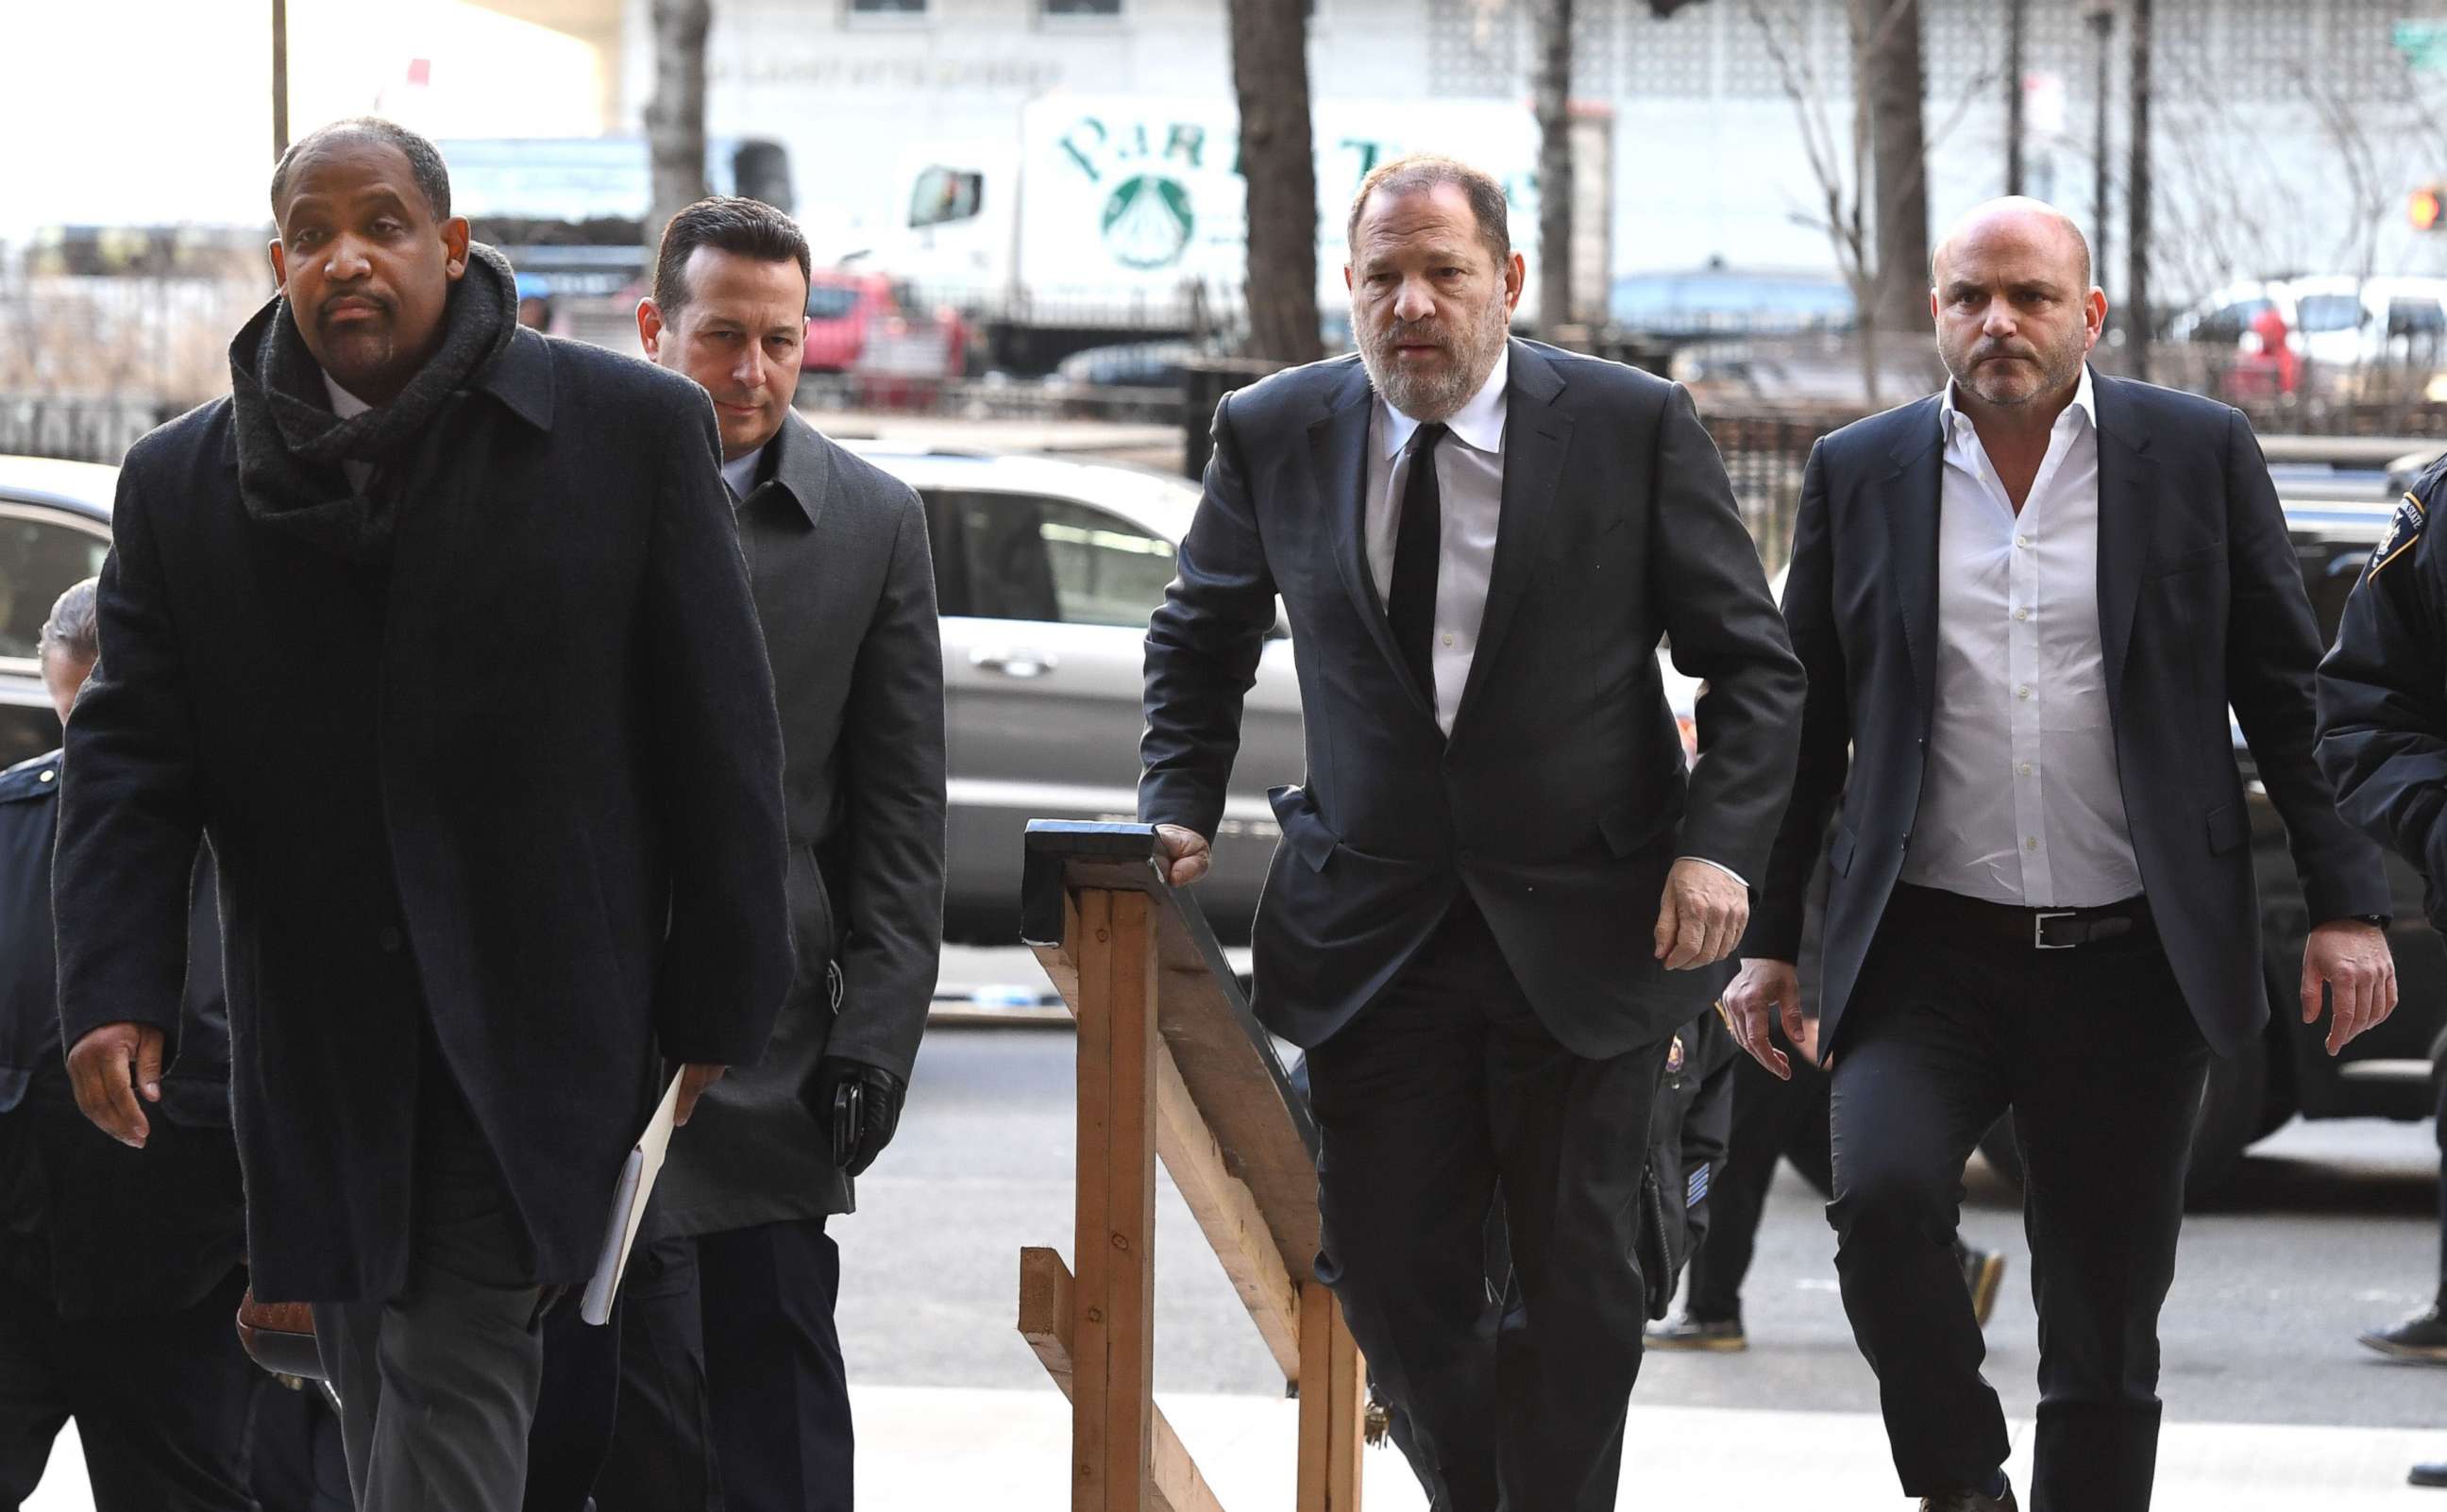 PHOTO: Harvey Weinstein arrives State Supreme Court in Manhattan with his new team of lawyers Jose Baez (2nd L), Ronald Sullivan (L) in N.Y., Jan. 25, 2019.